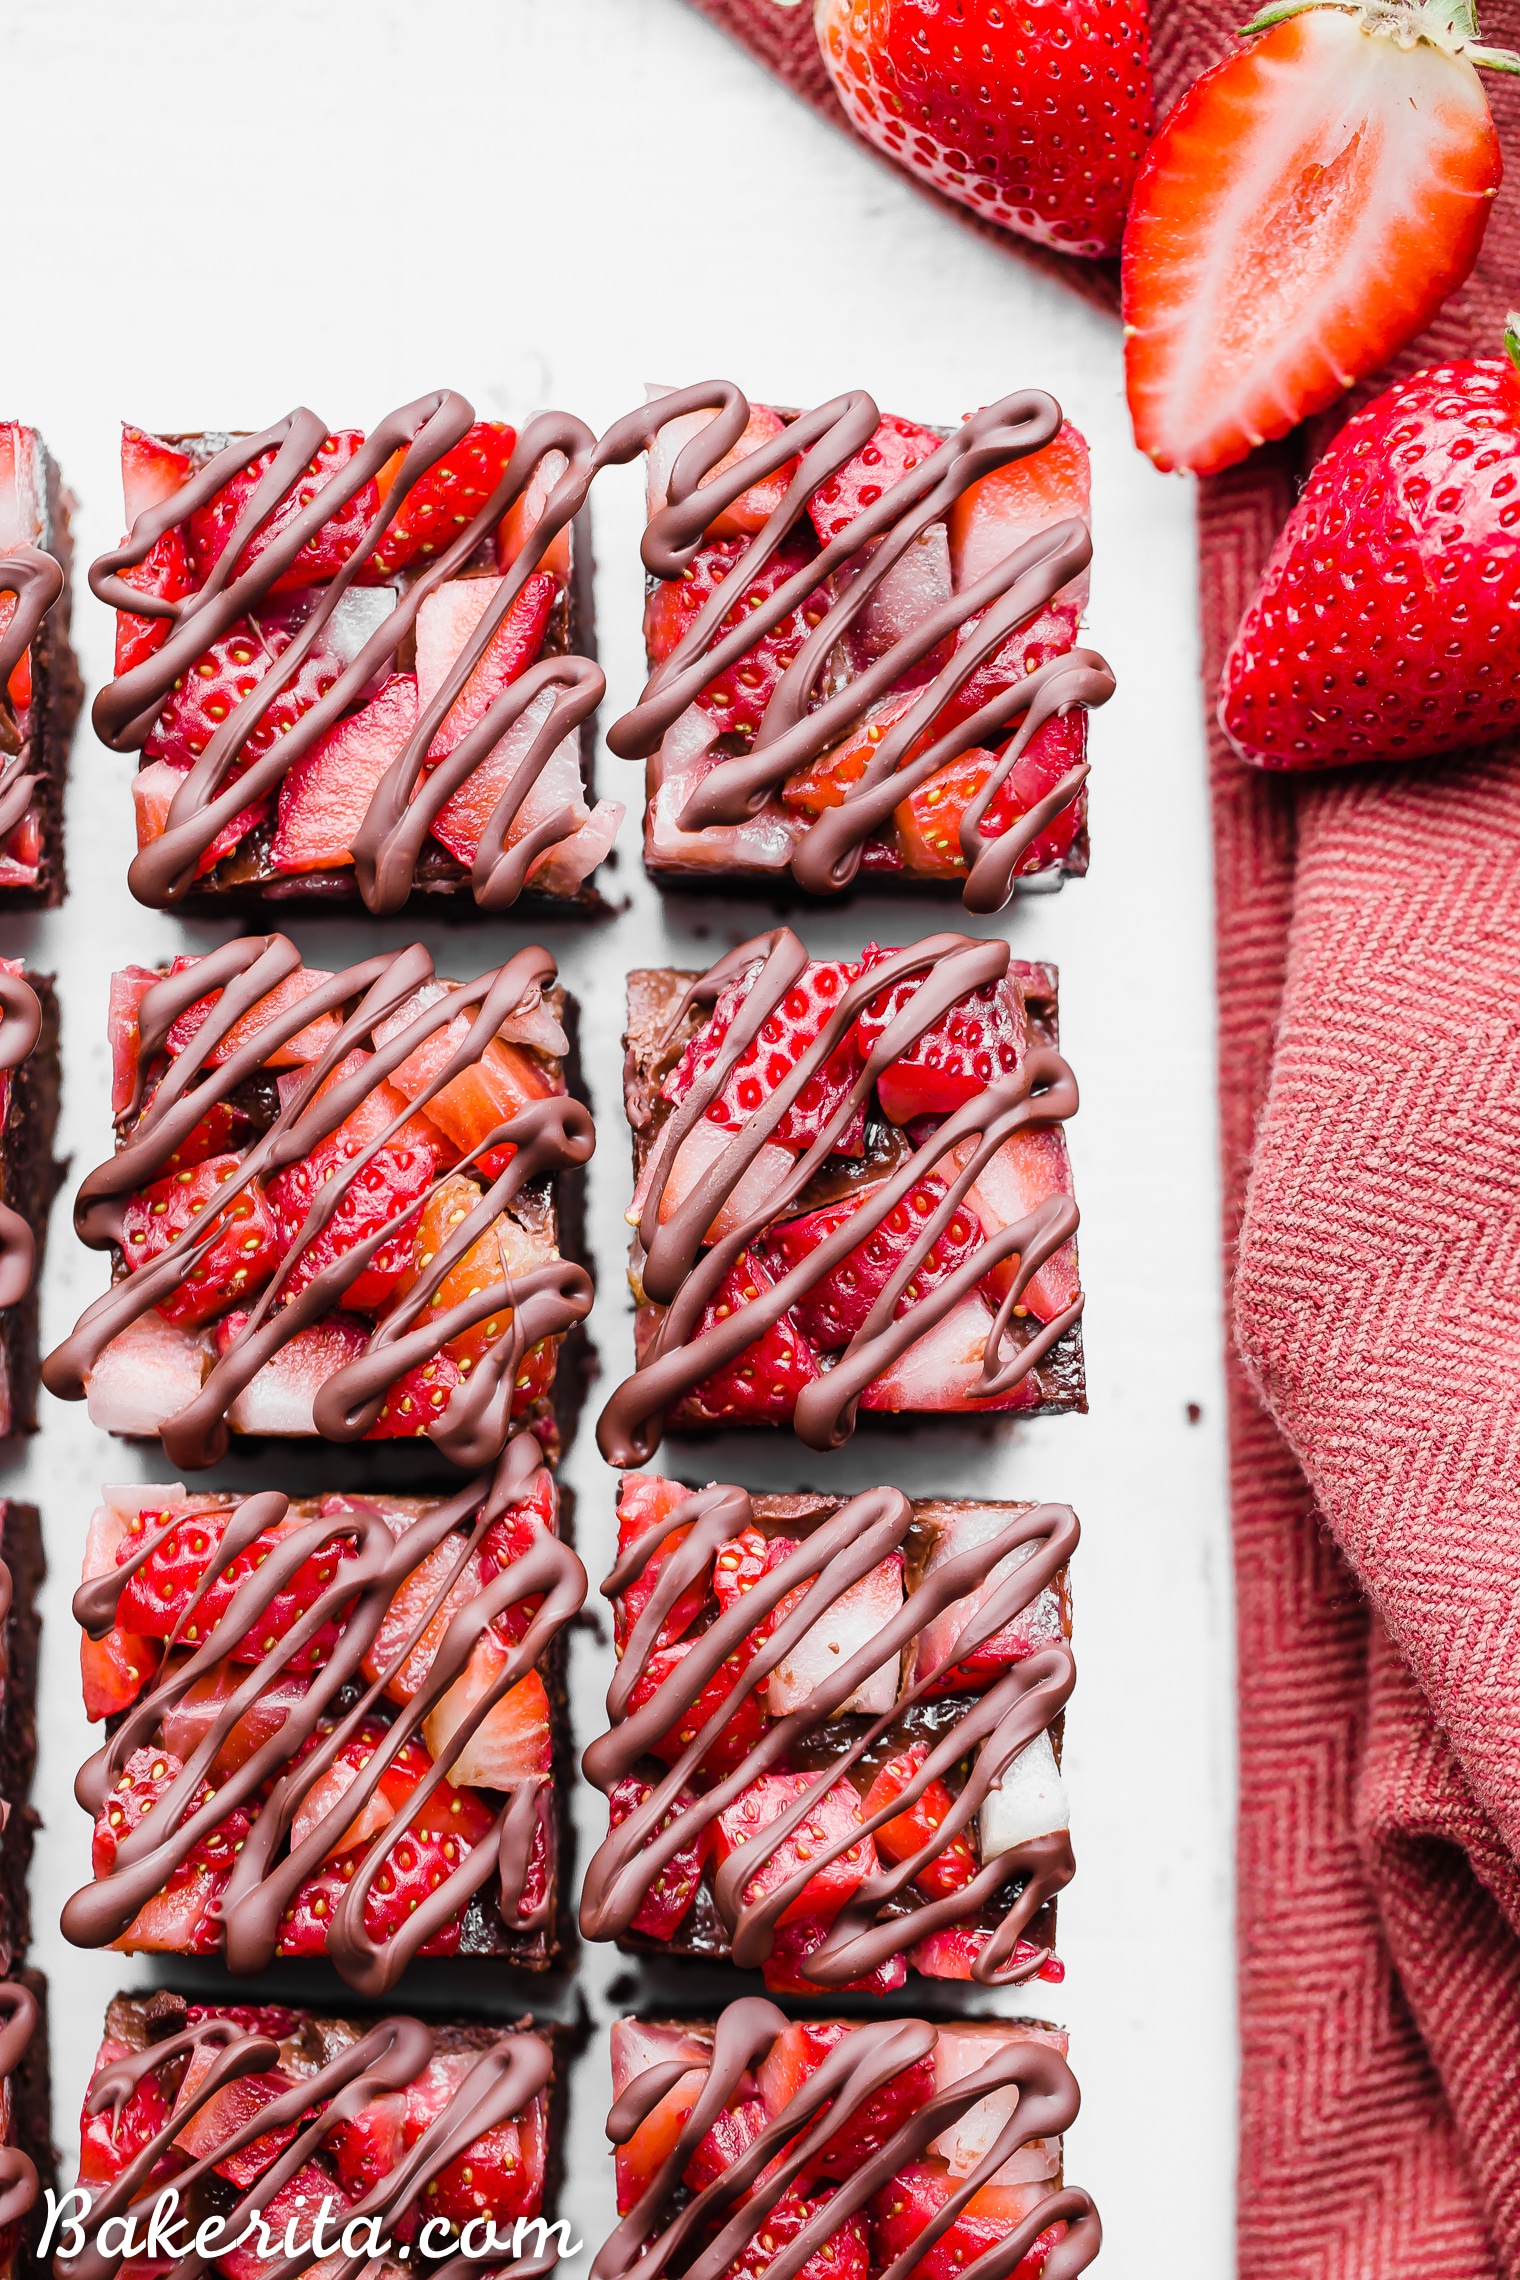 This Chocolate Strawberry Fudge is a simple and delicious five-ingredient recipe you'll want to make over and over! It tastes just like chocolate covered strawberries, but way easier to make. There's no cooking required for this gluten-free, paleo and vegan fudge recipe.